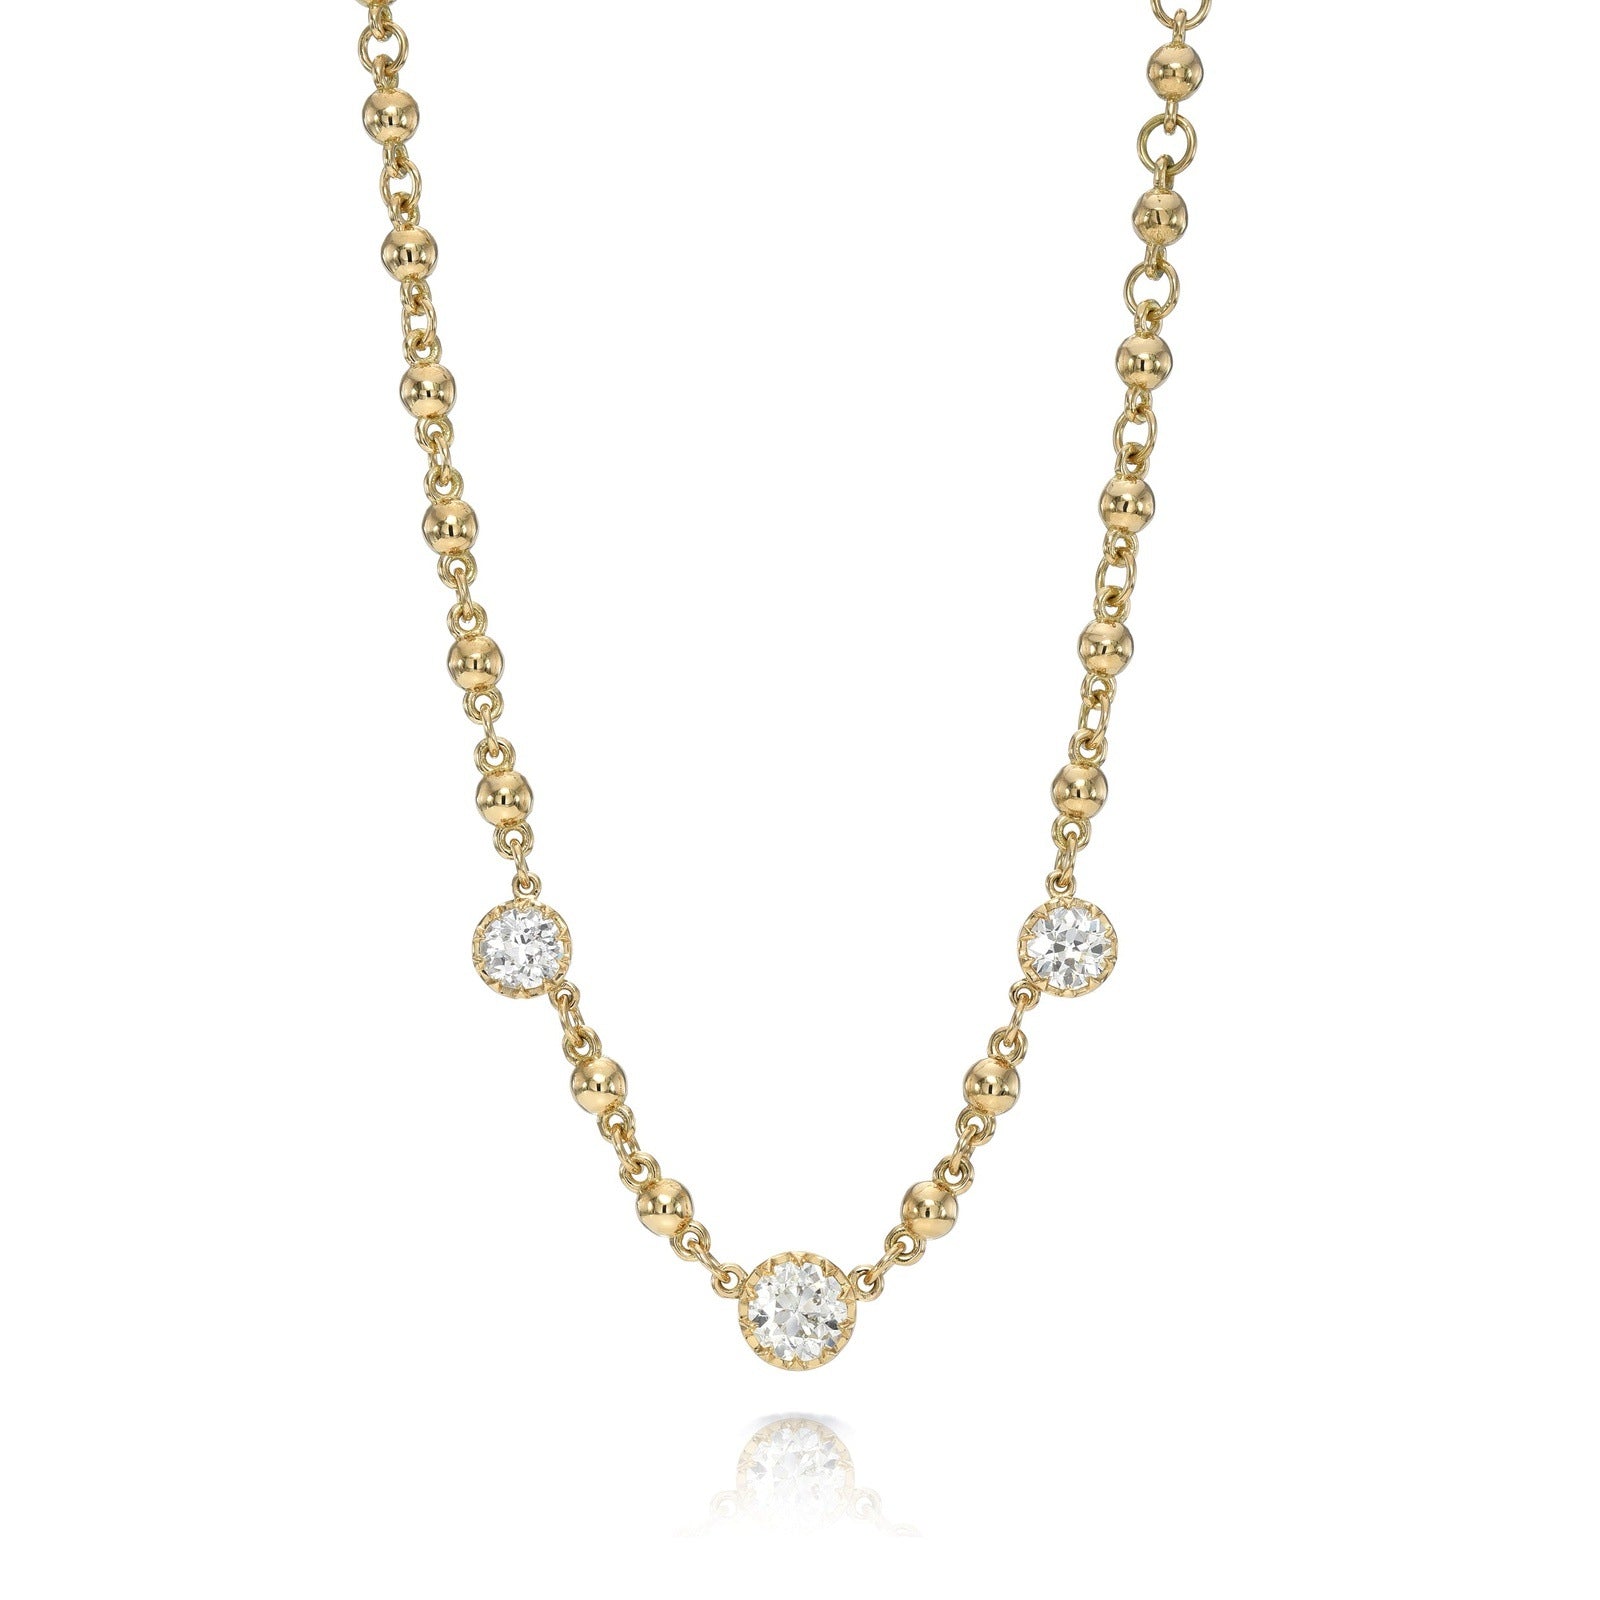 SINGLE STONE THREE STONE ROSALINA NECKLACE featuring 1.61ctw J,K,M-VS-SI2 old mine cut diamonds prong set in a handcrafted 18K yellow gold necklace.